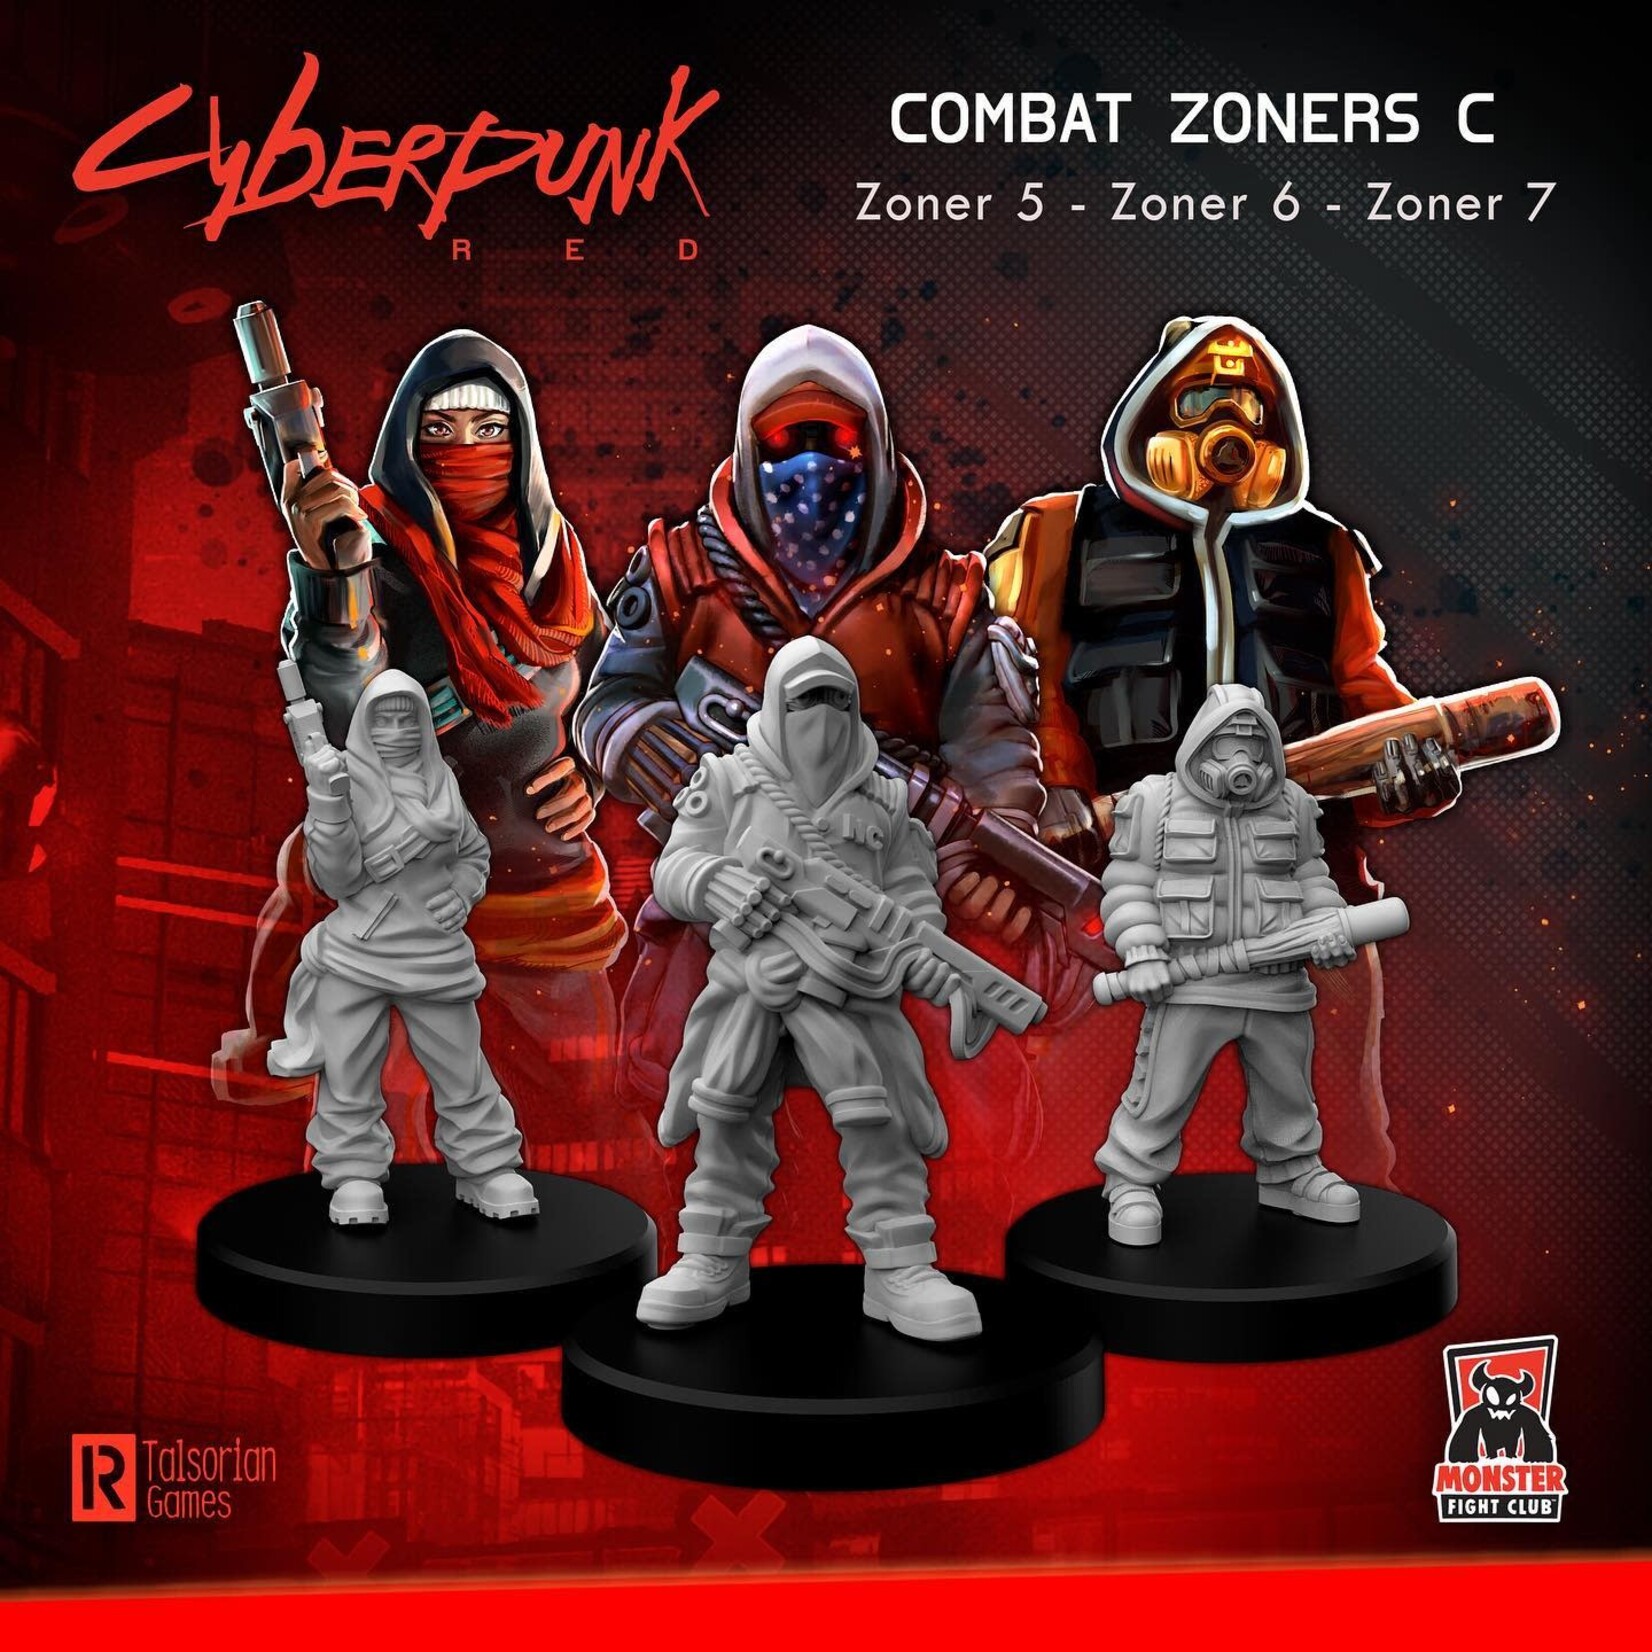 Monster Fight Club Cyberpunk Red RPG: Combat Zoners C (Lookouts)